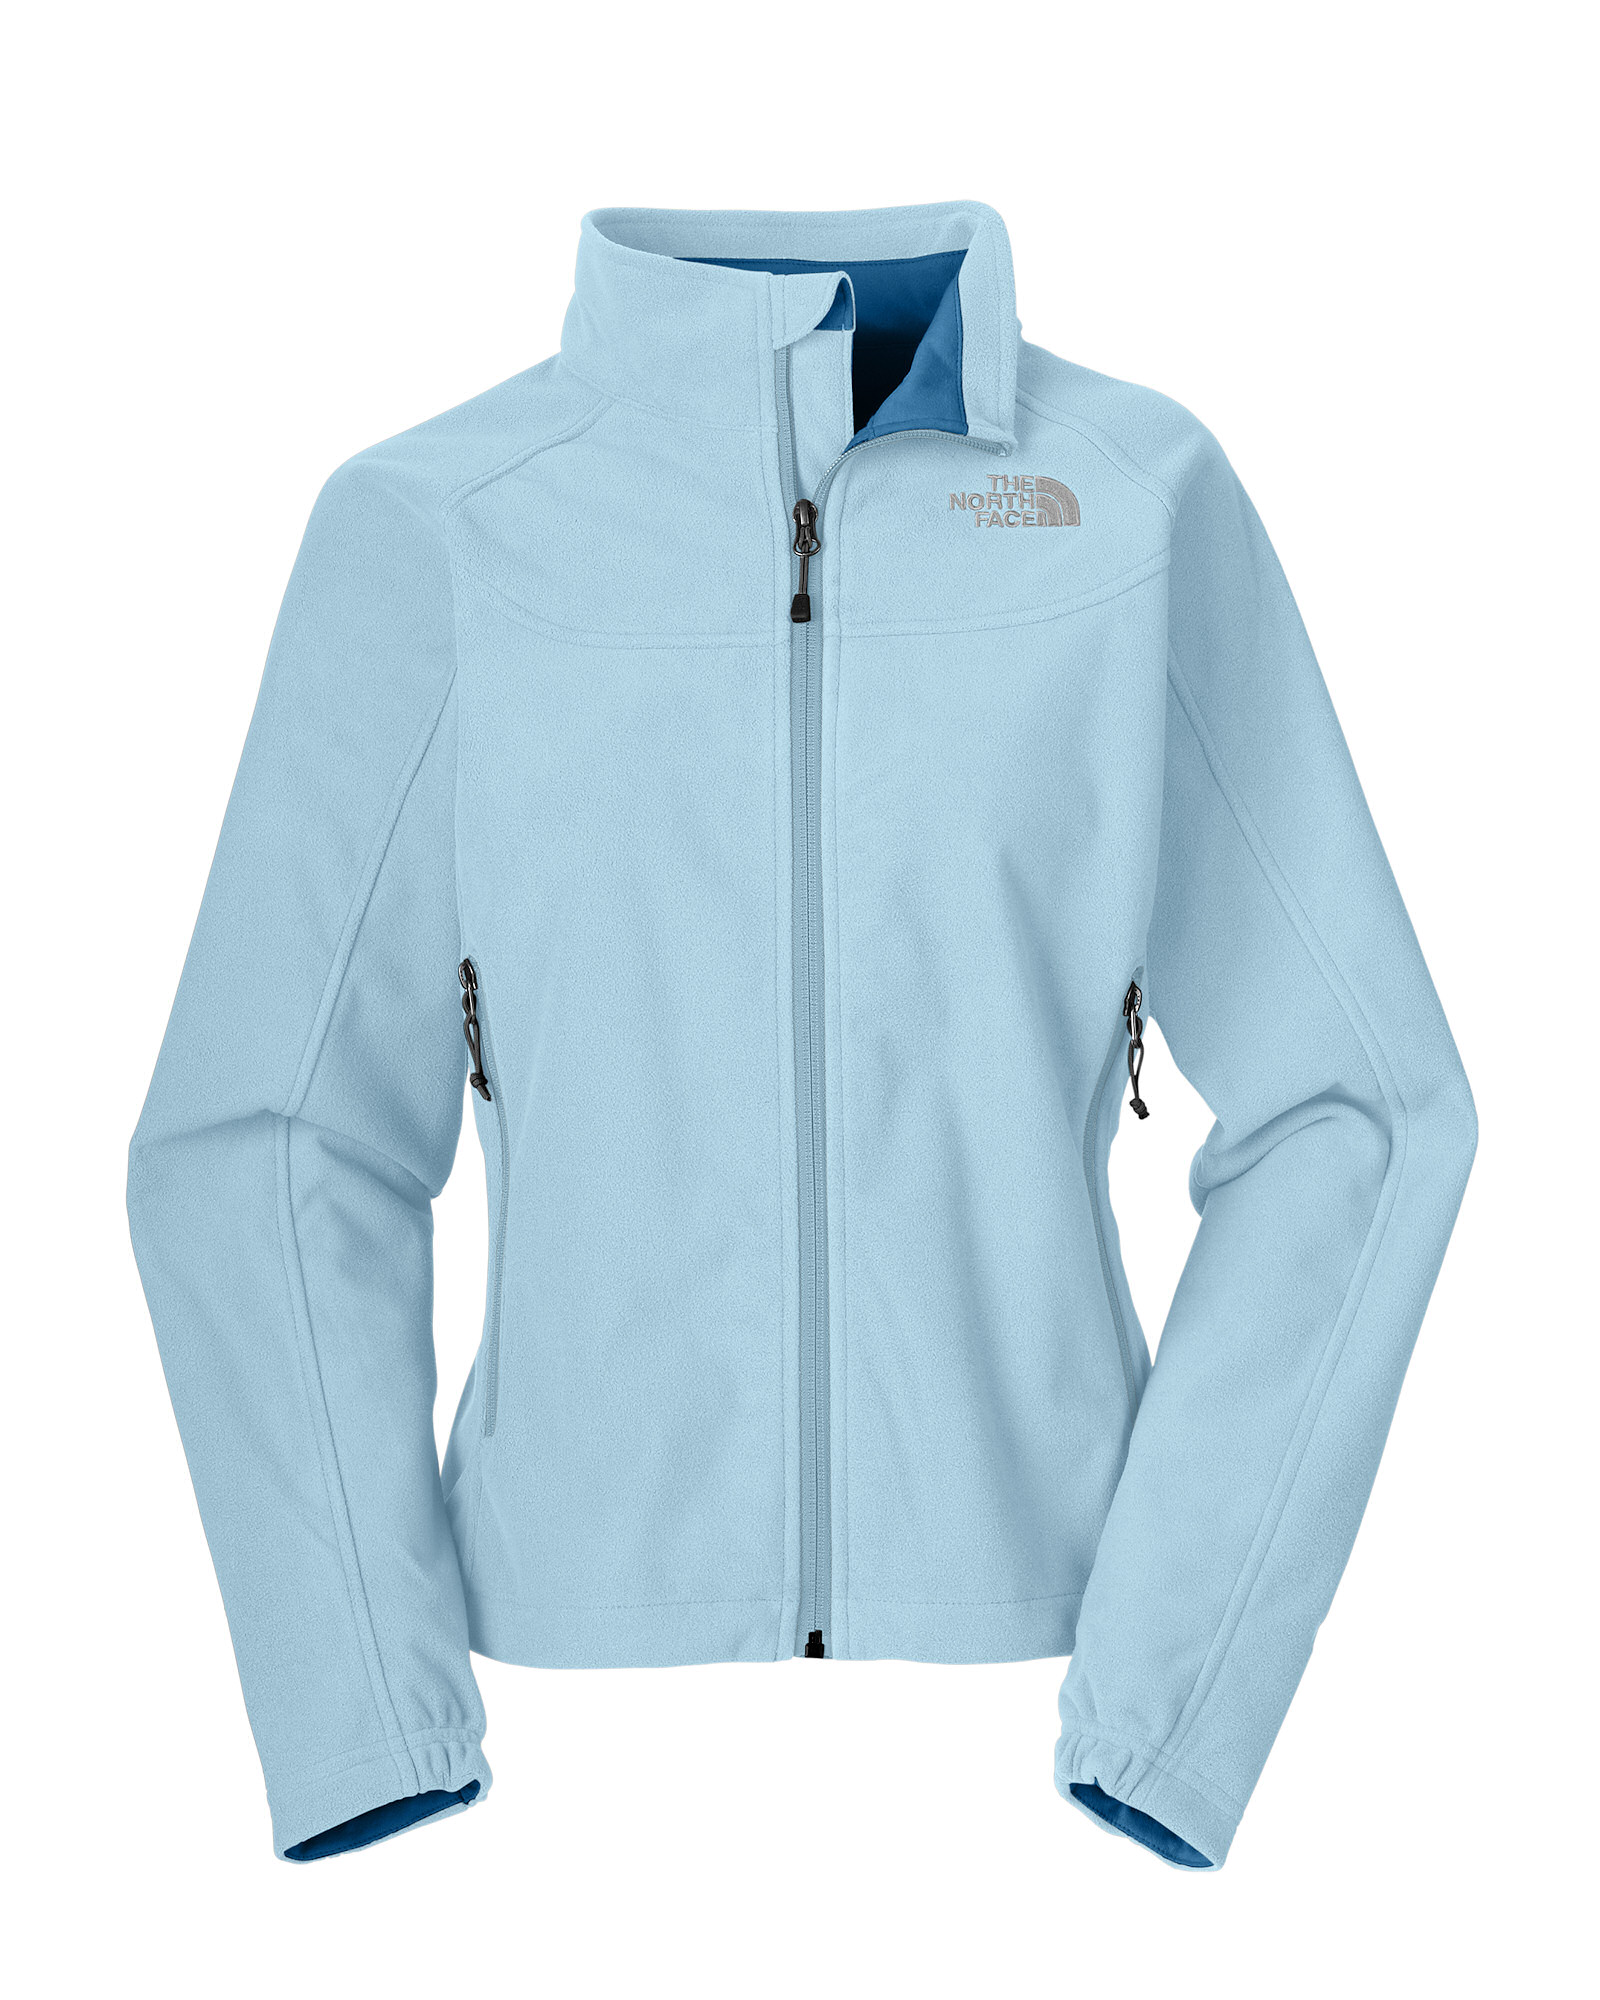 Sweeten Andet Byen The North Face WindWall 1 Jacket Women's (Pale Blue) at NorwaySports.com  Archive